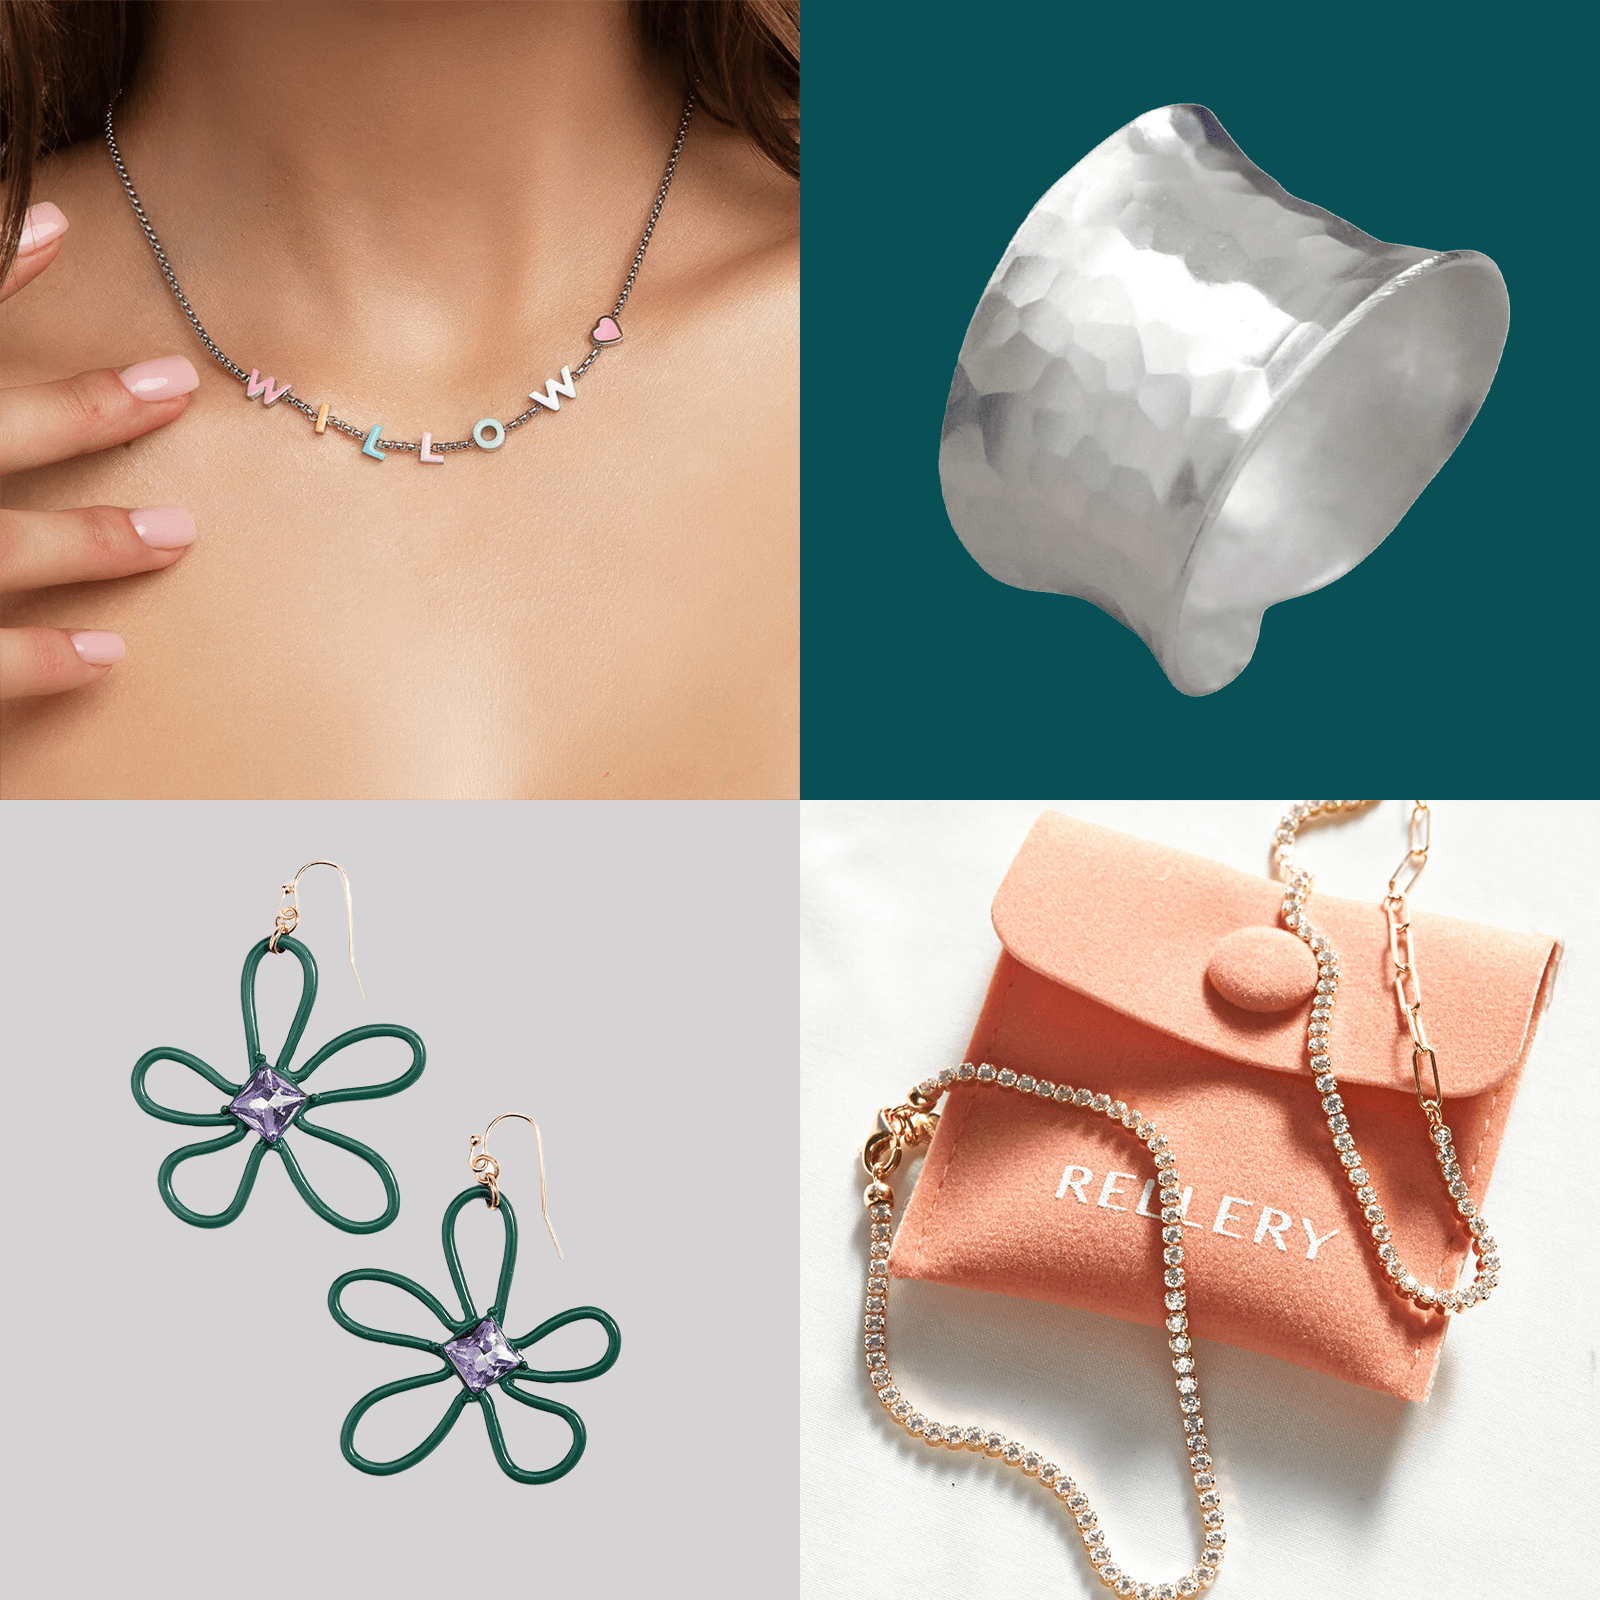 Summer Jewelry Trends for 2023